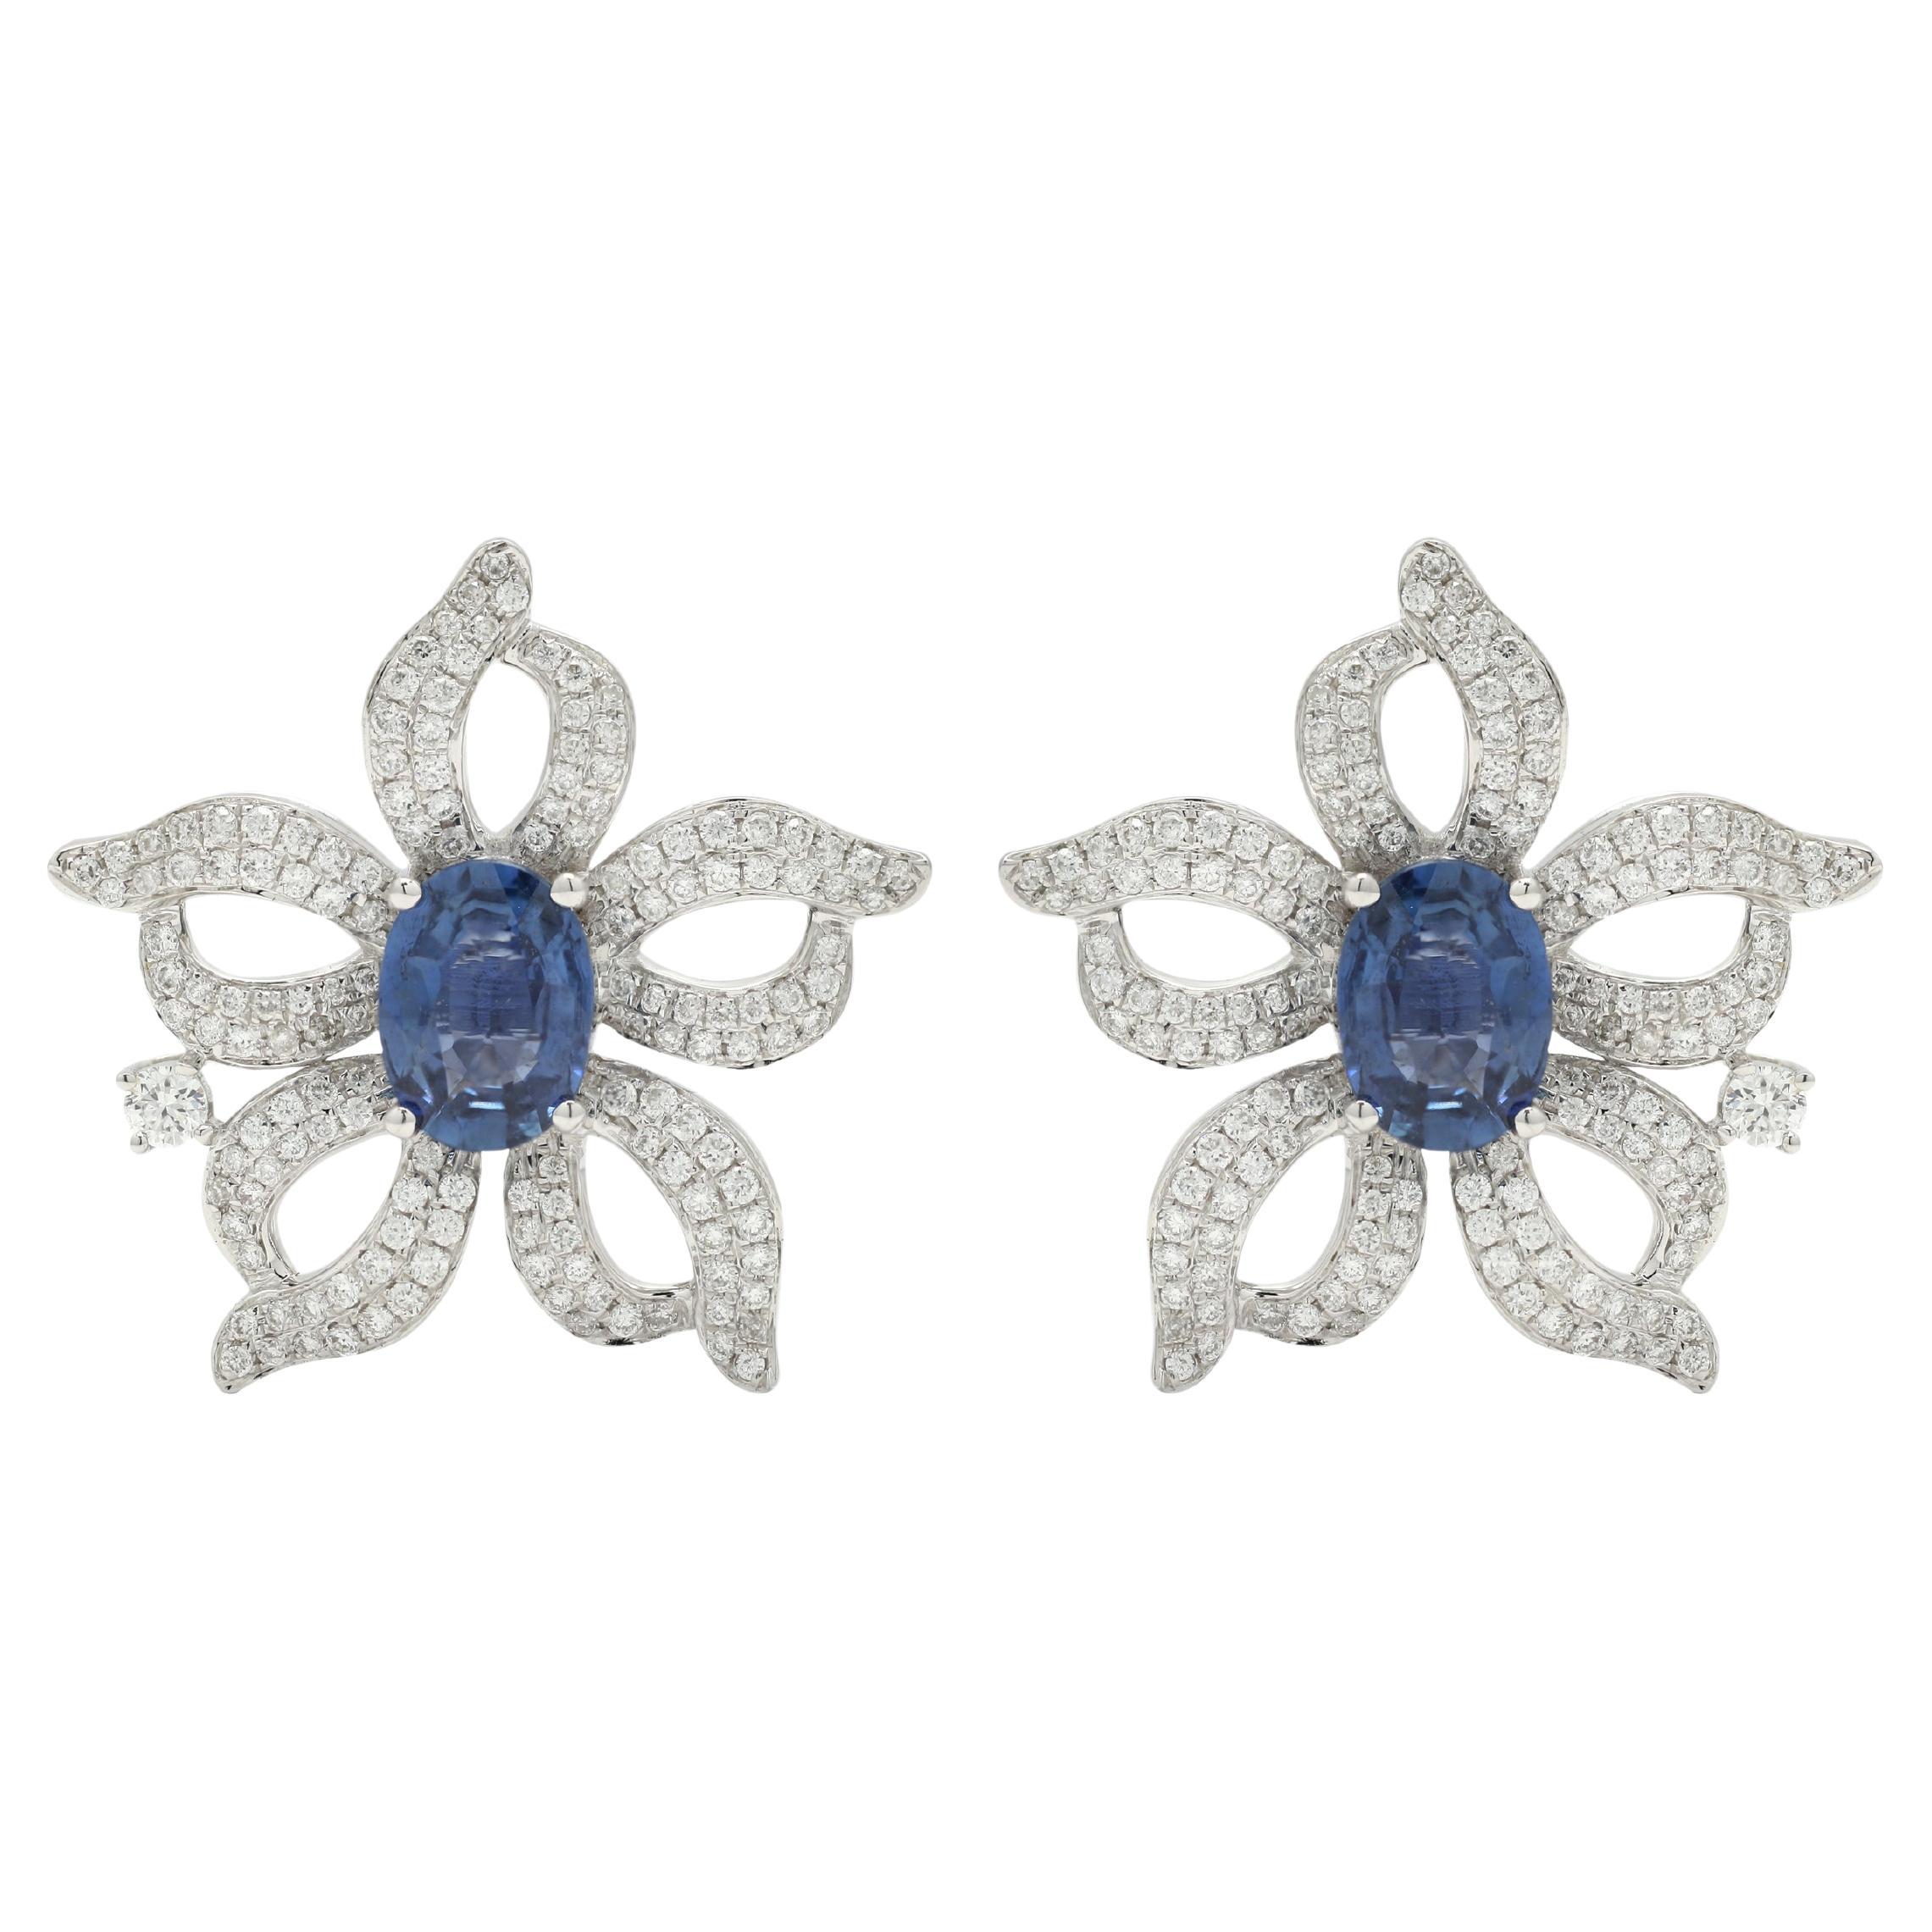 14K White Gold Flower Stud Earrings Studded with Diamond and Sapphire